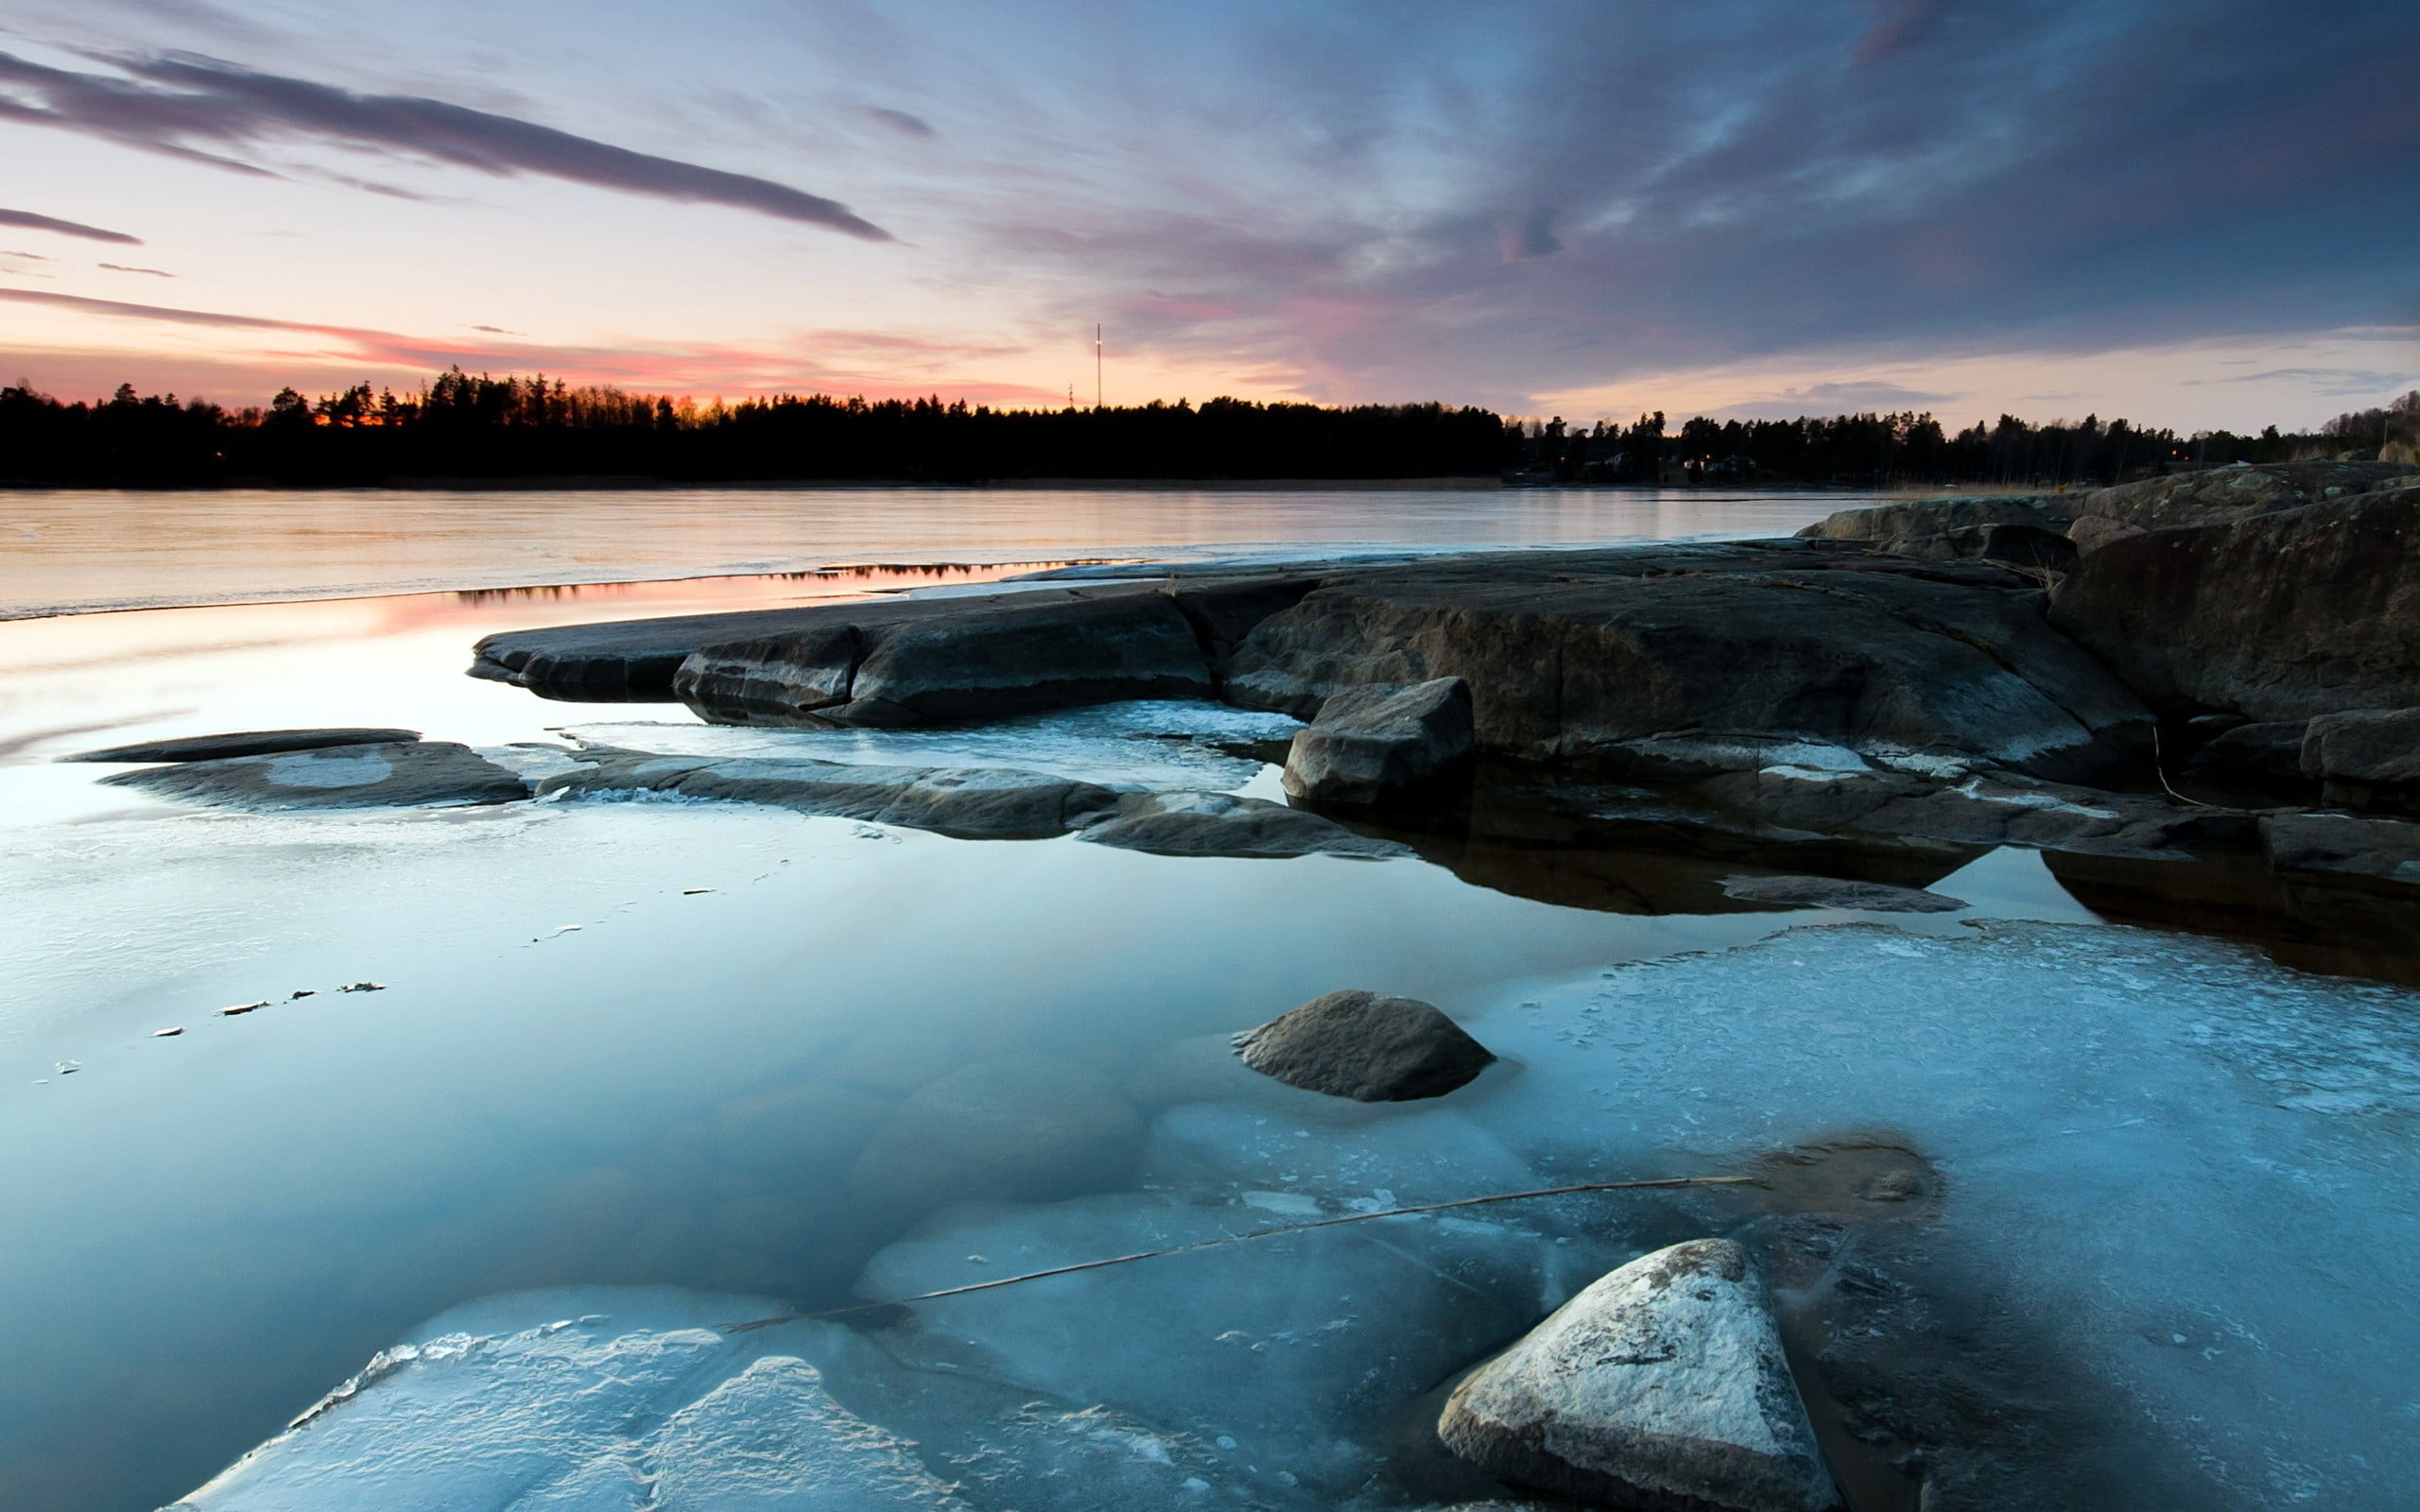 rock formation near body of water, nature, ice, lake